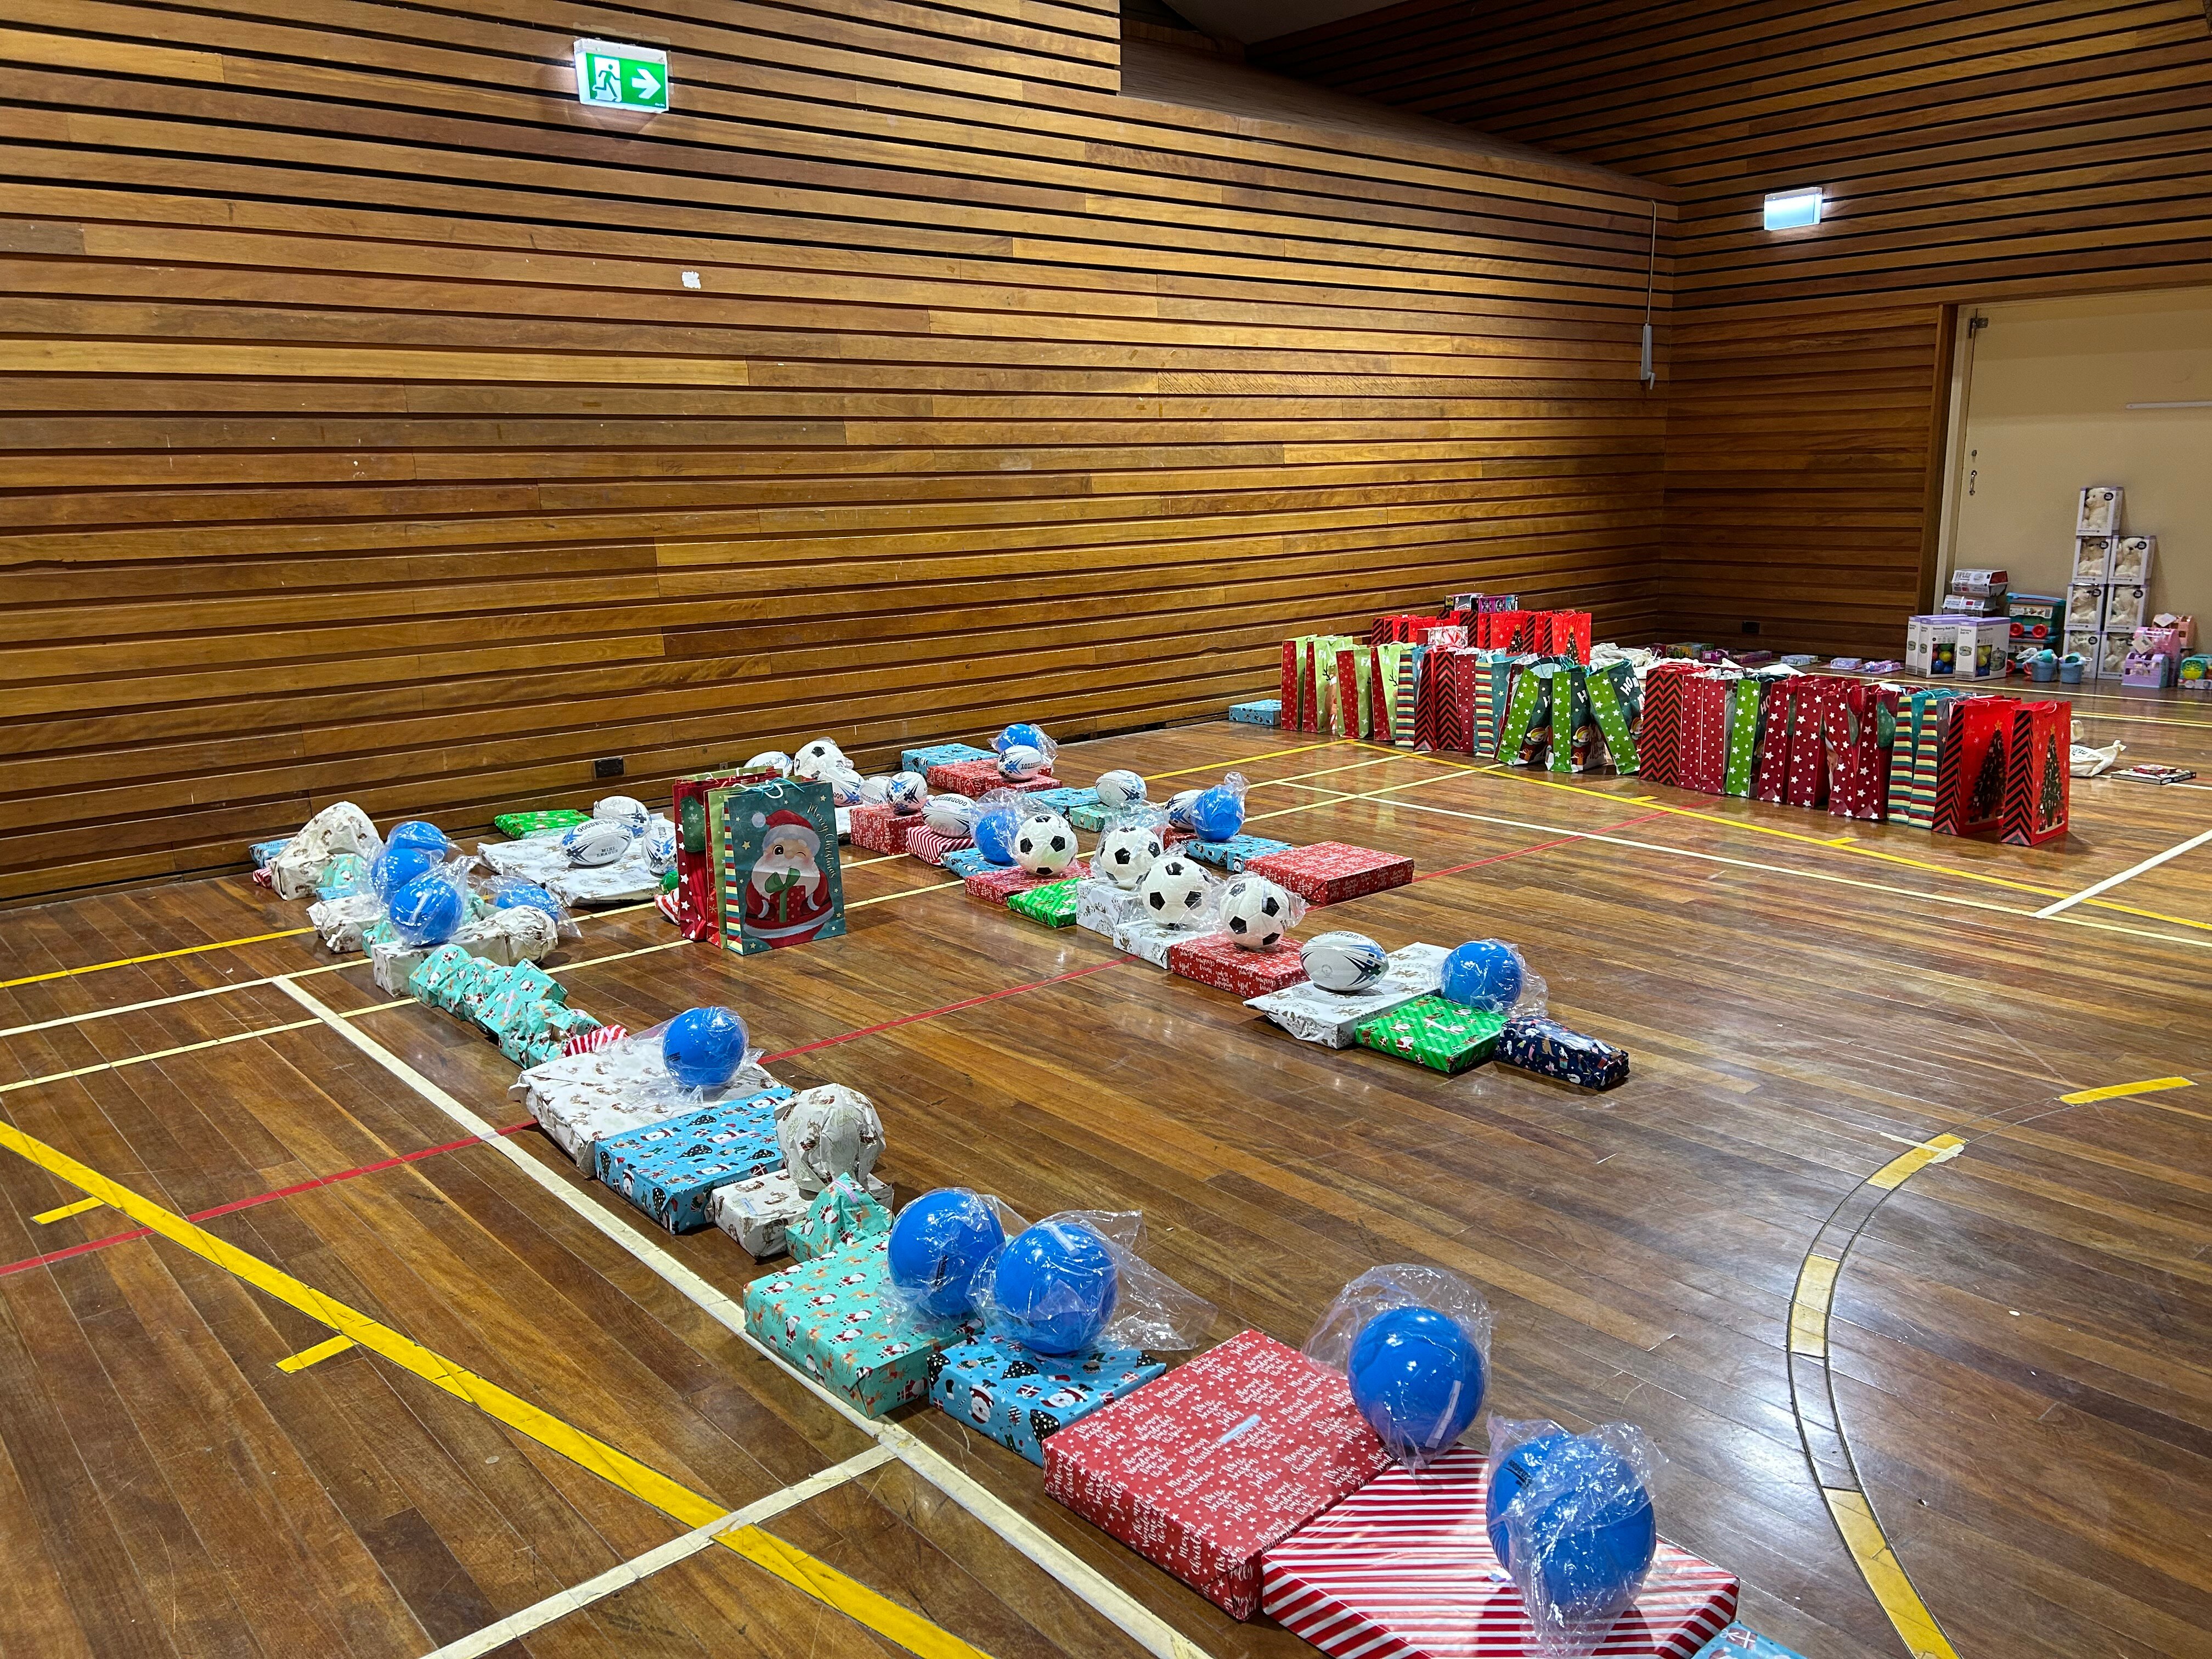 presents are laid out on an indoor basketball court.